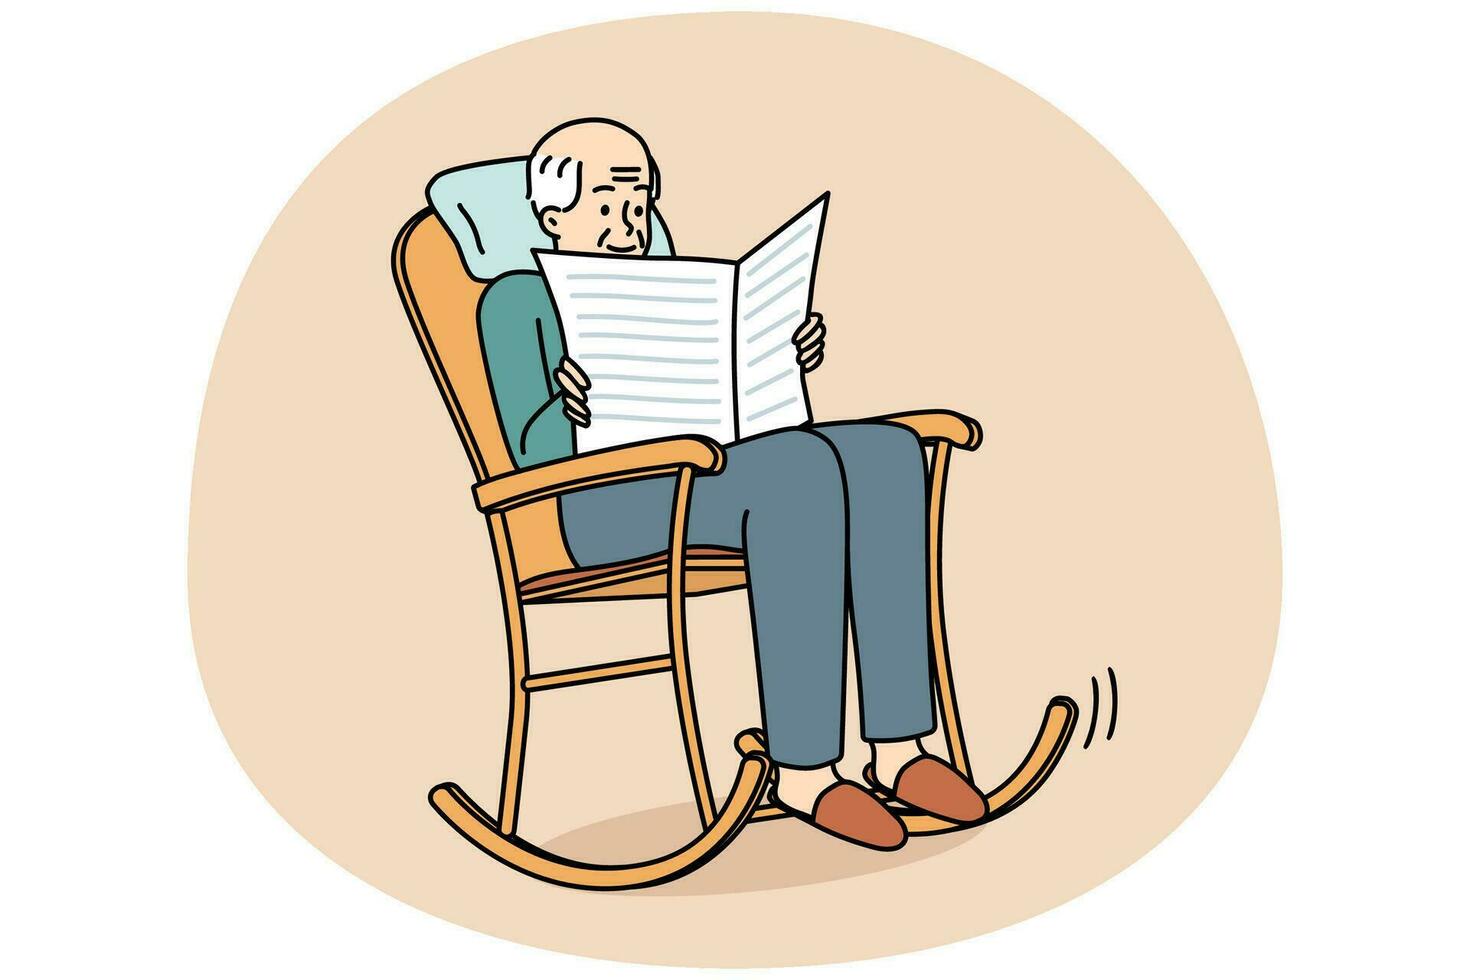 Elderly man sit in rocking chair reading newspaper. Old grey-haired grandfather relax in armchair enjoy press. Happy calm maturity. Vector illustration.